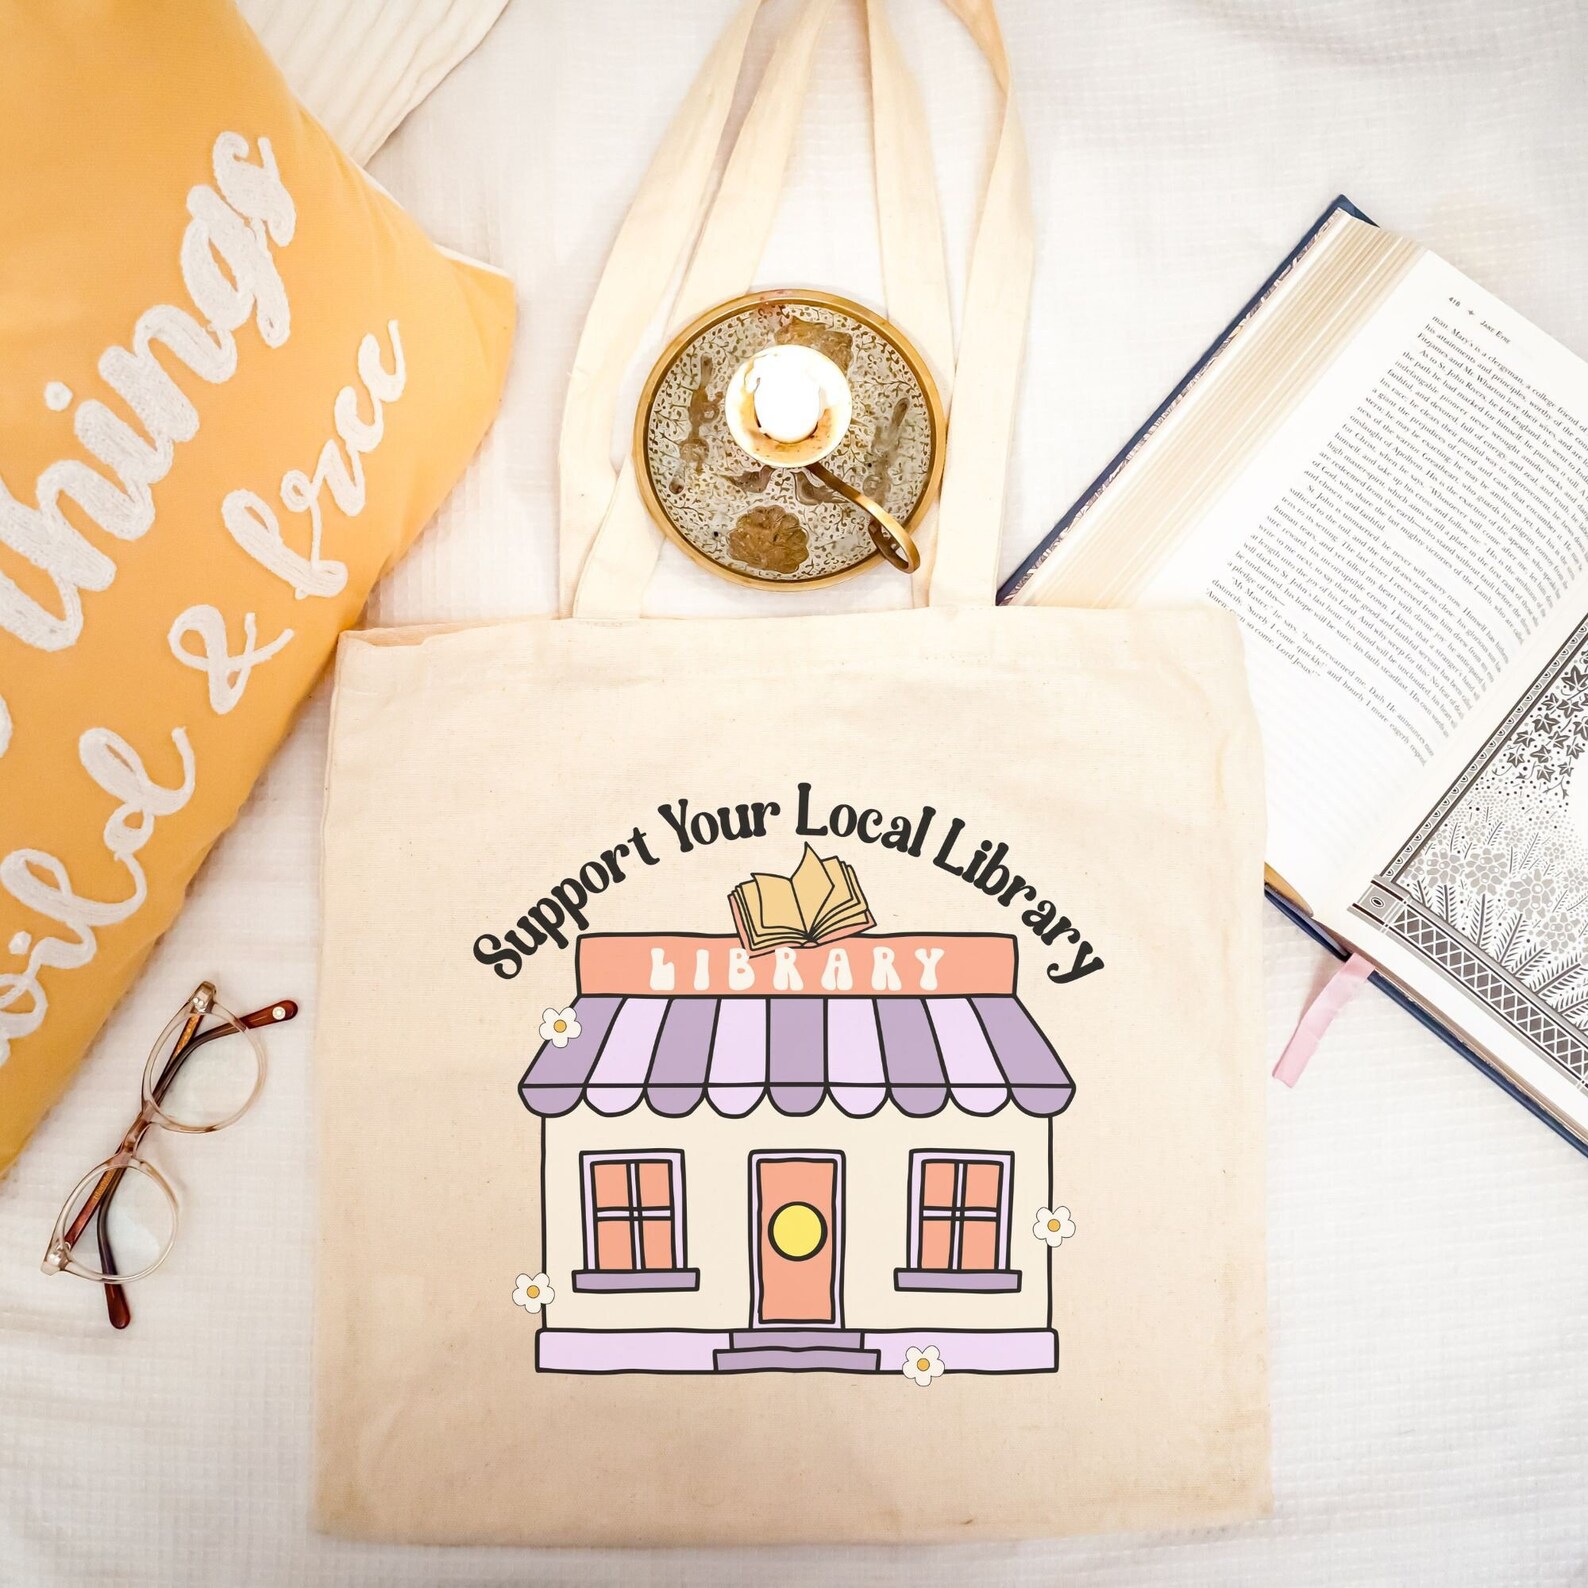 support your local library tote baag